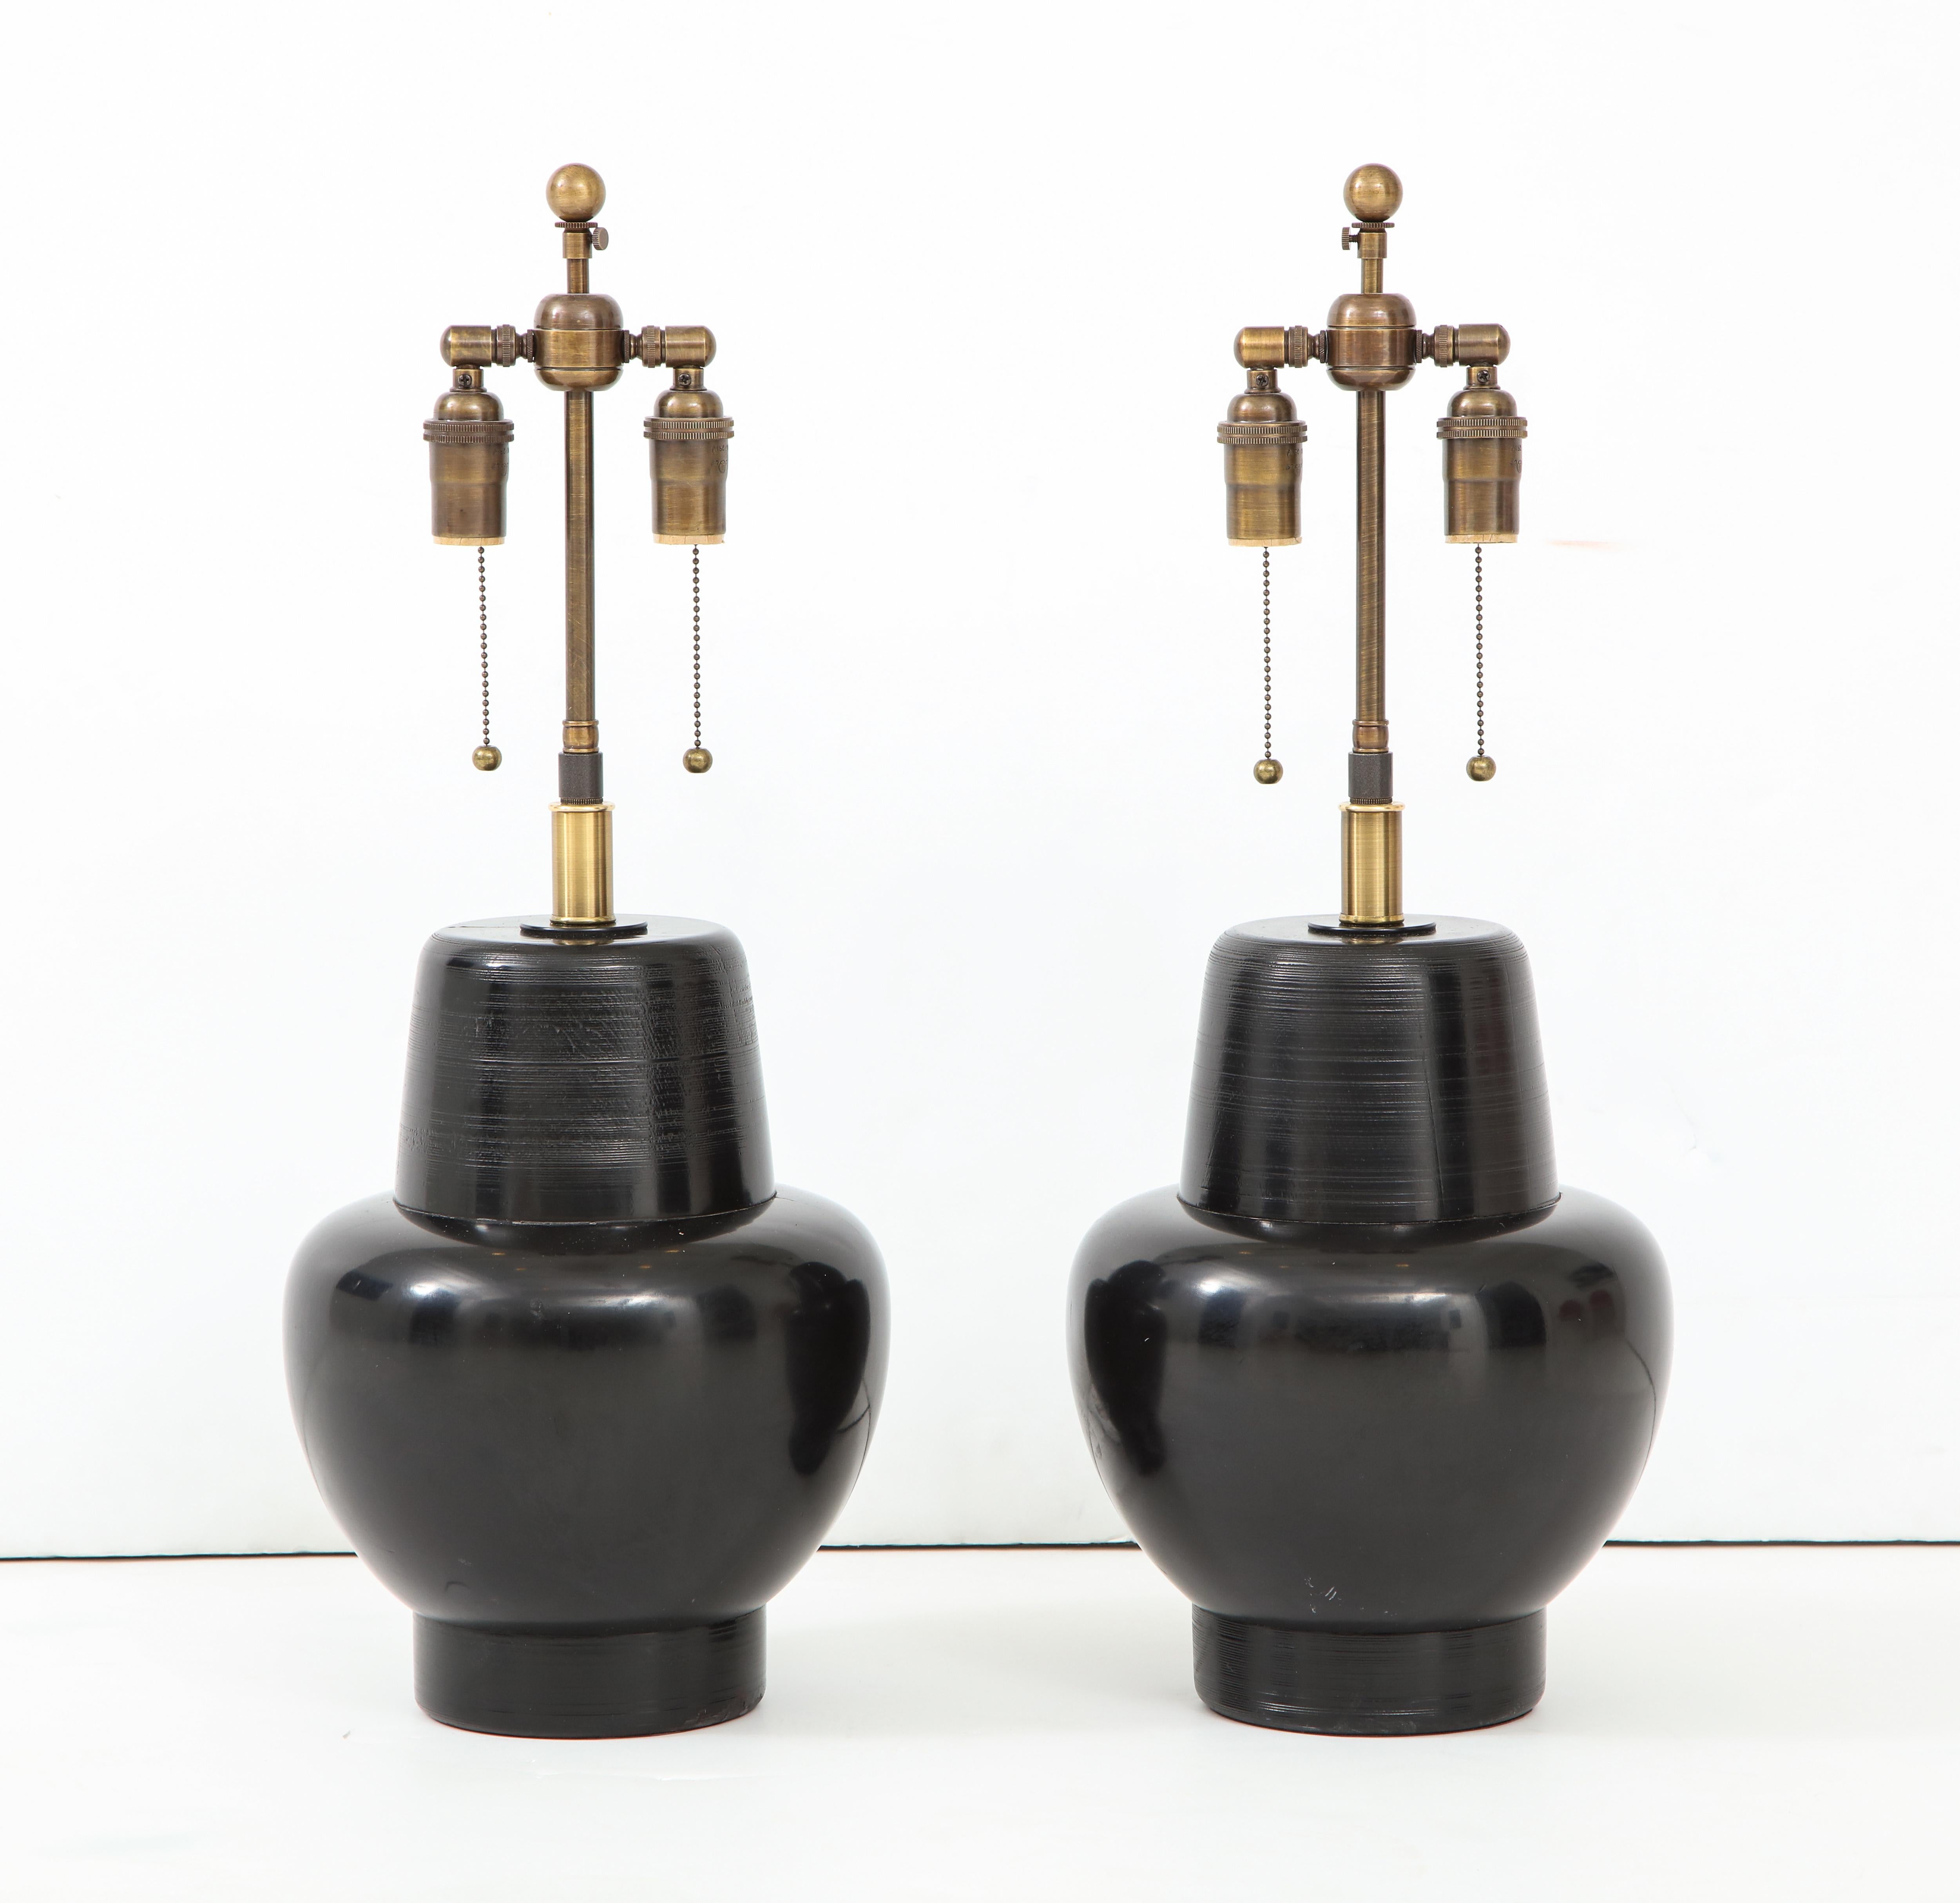 Wonderful pair of 1950s wooden lamps by James Mont.
The lamps have a black lacquered finish and they have been newly rewired with antique brass double clusters.
The height just to the top of the wooden lamp body is 13.5